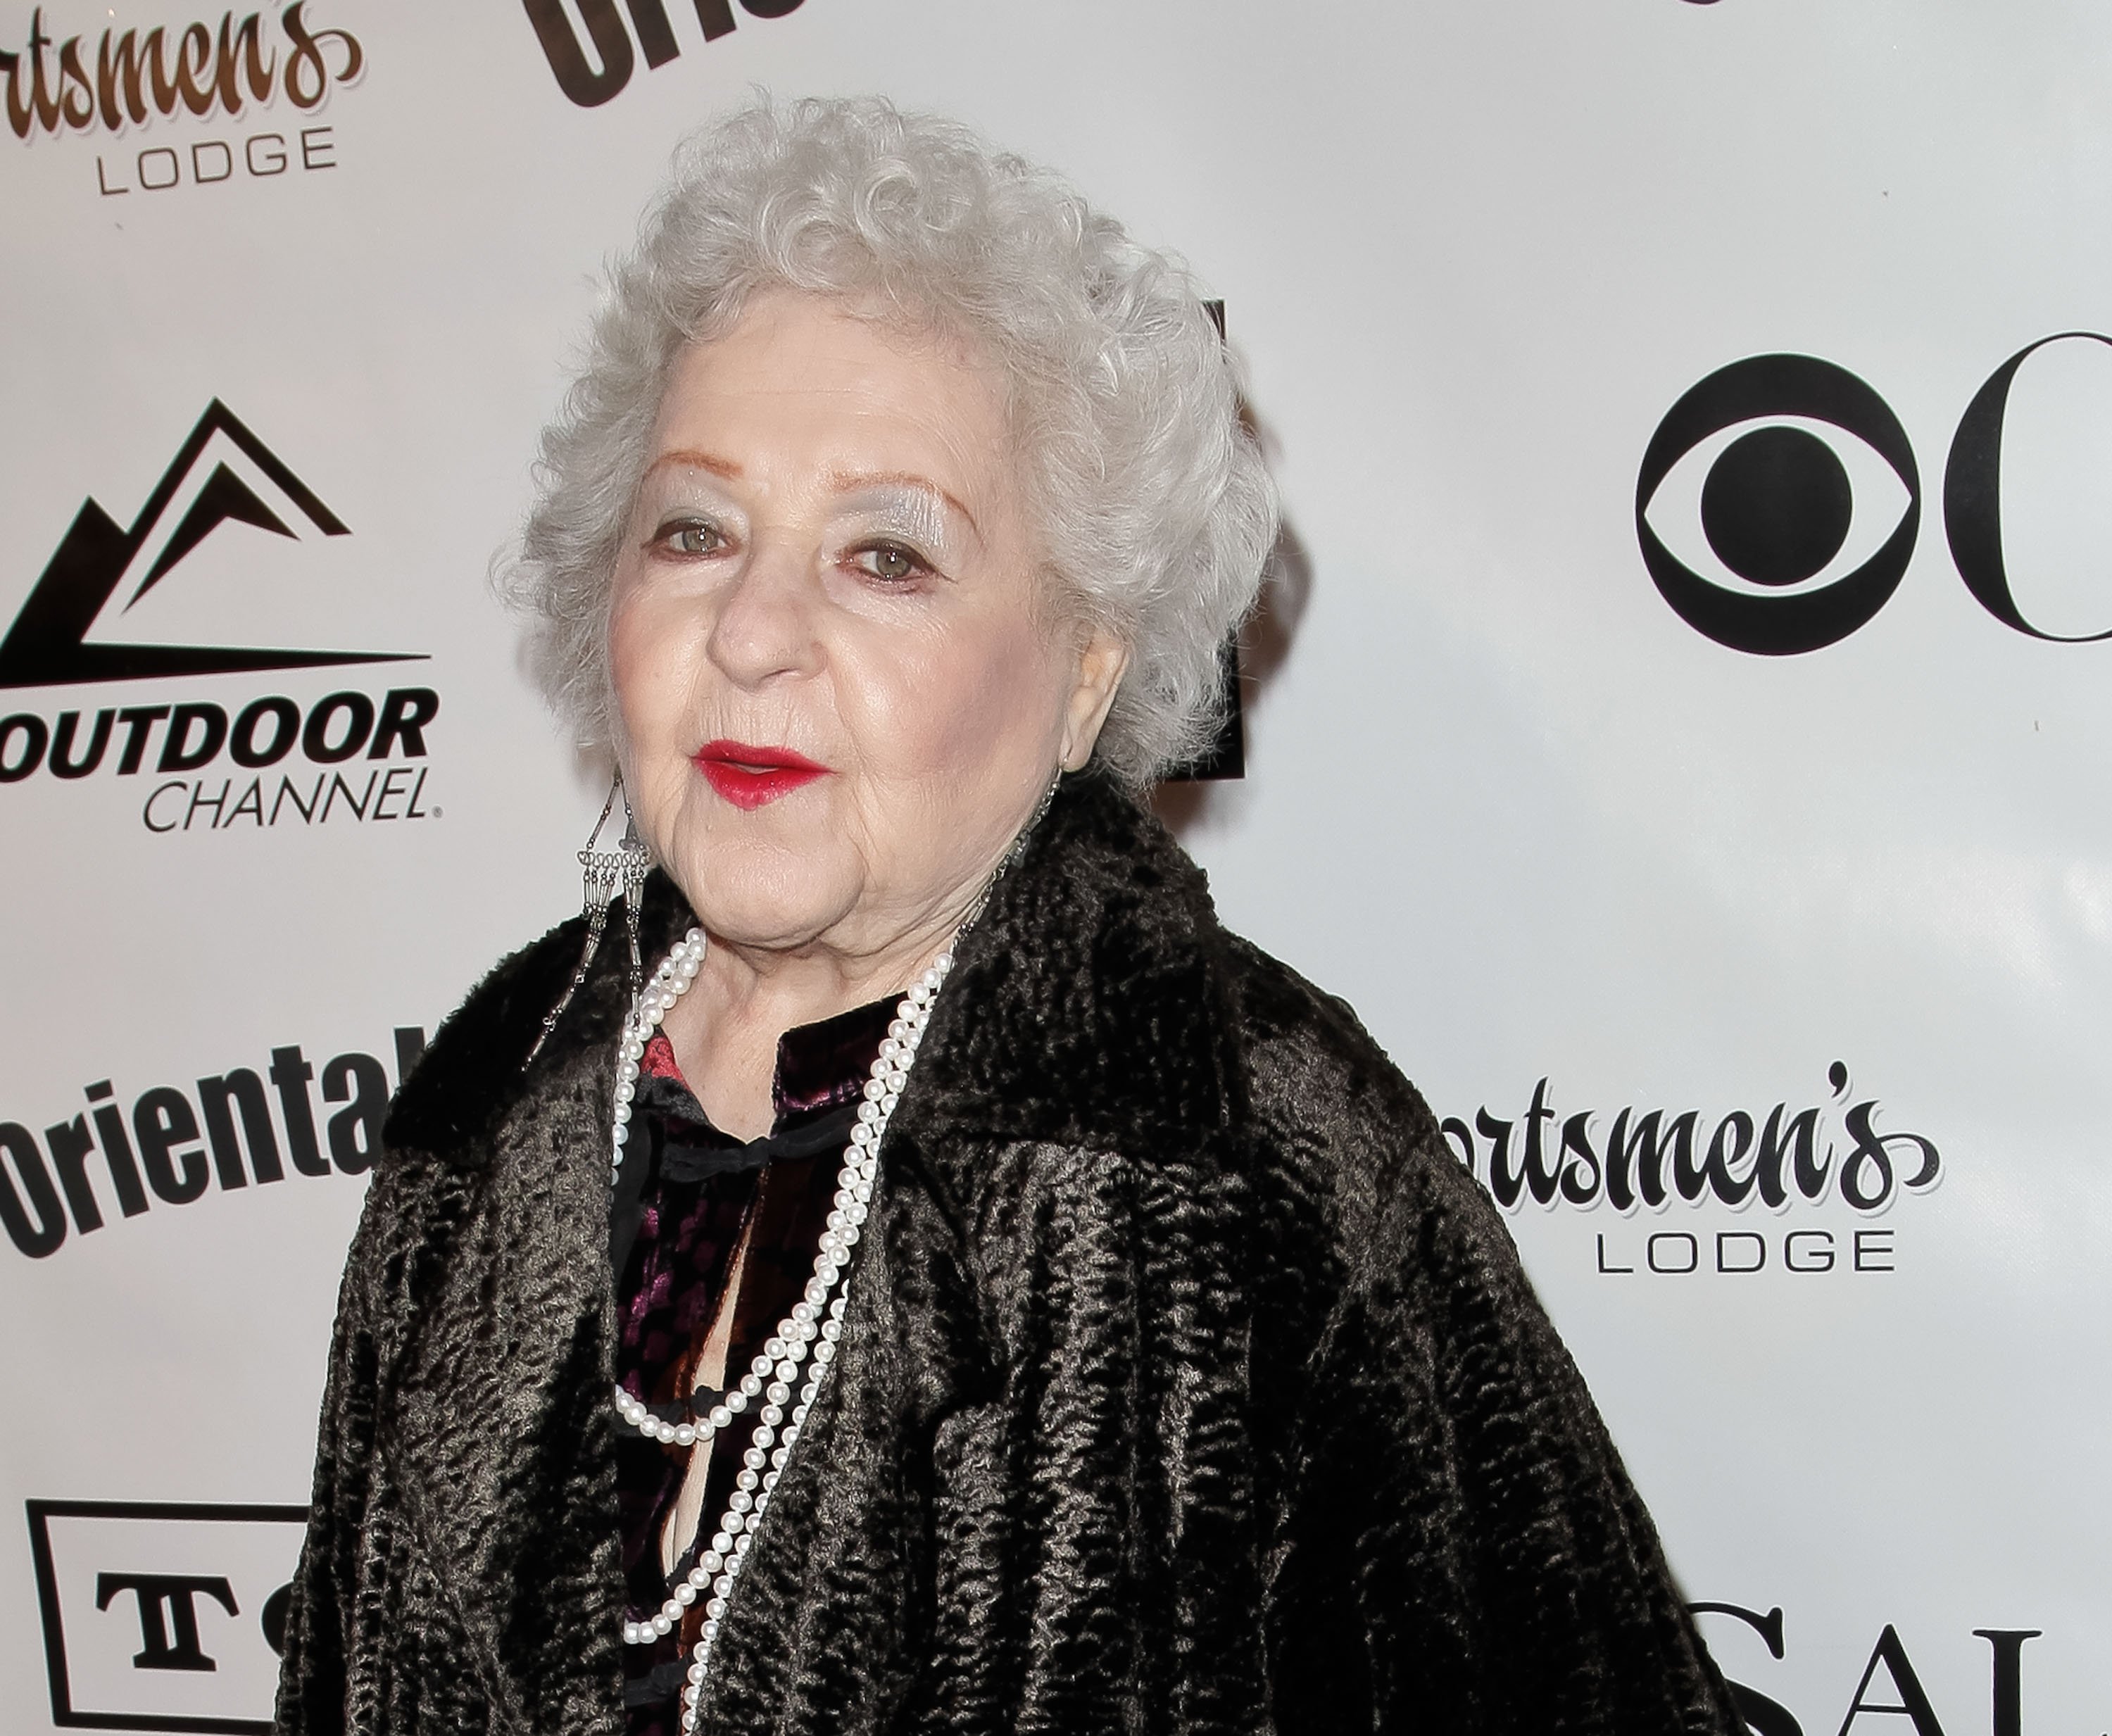  Estelle Harris attends the 2nd annual Borgnine movie star gala at Sportman's Lodge on February 1, 2014 in California. | Source: Tibrina Hobson/Getty Images